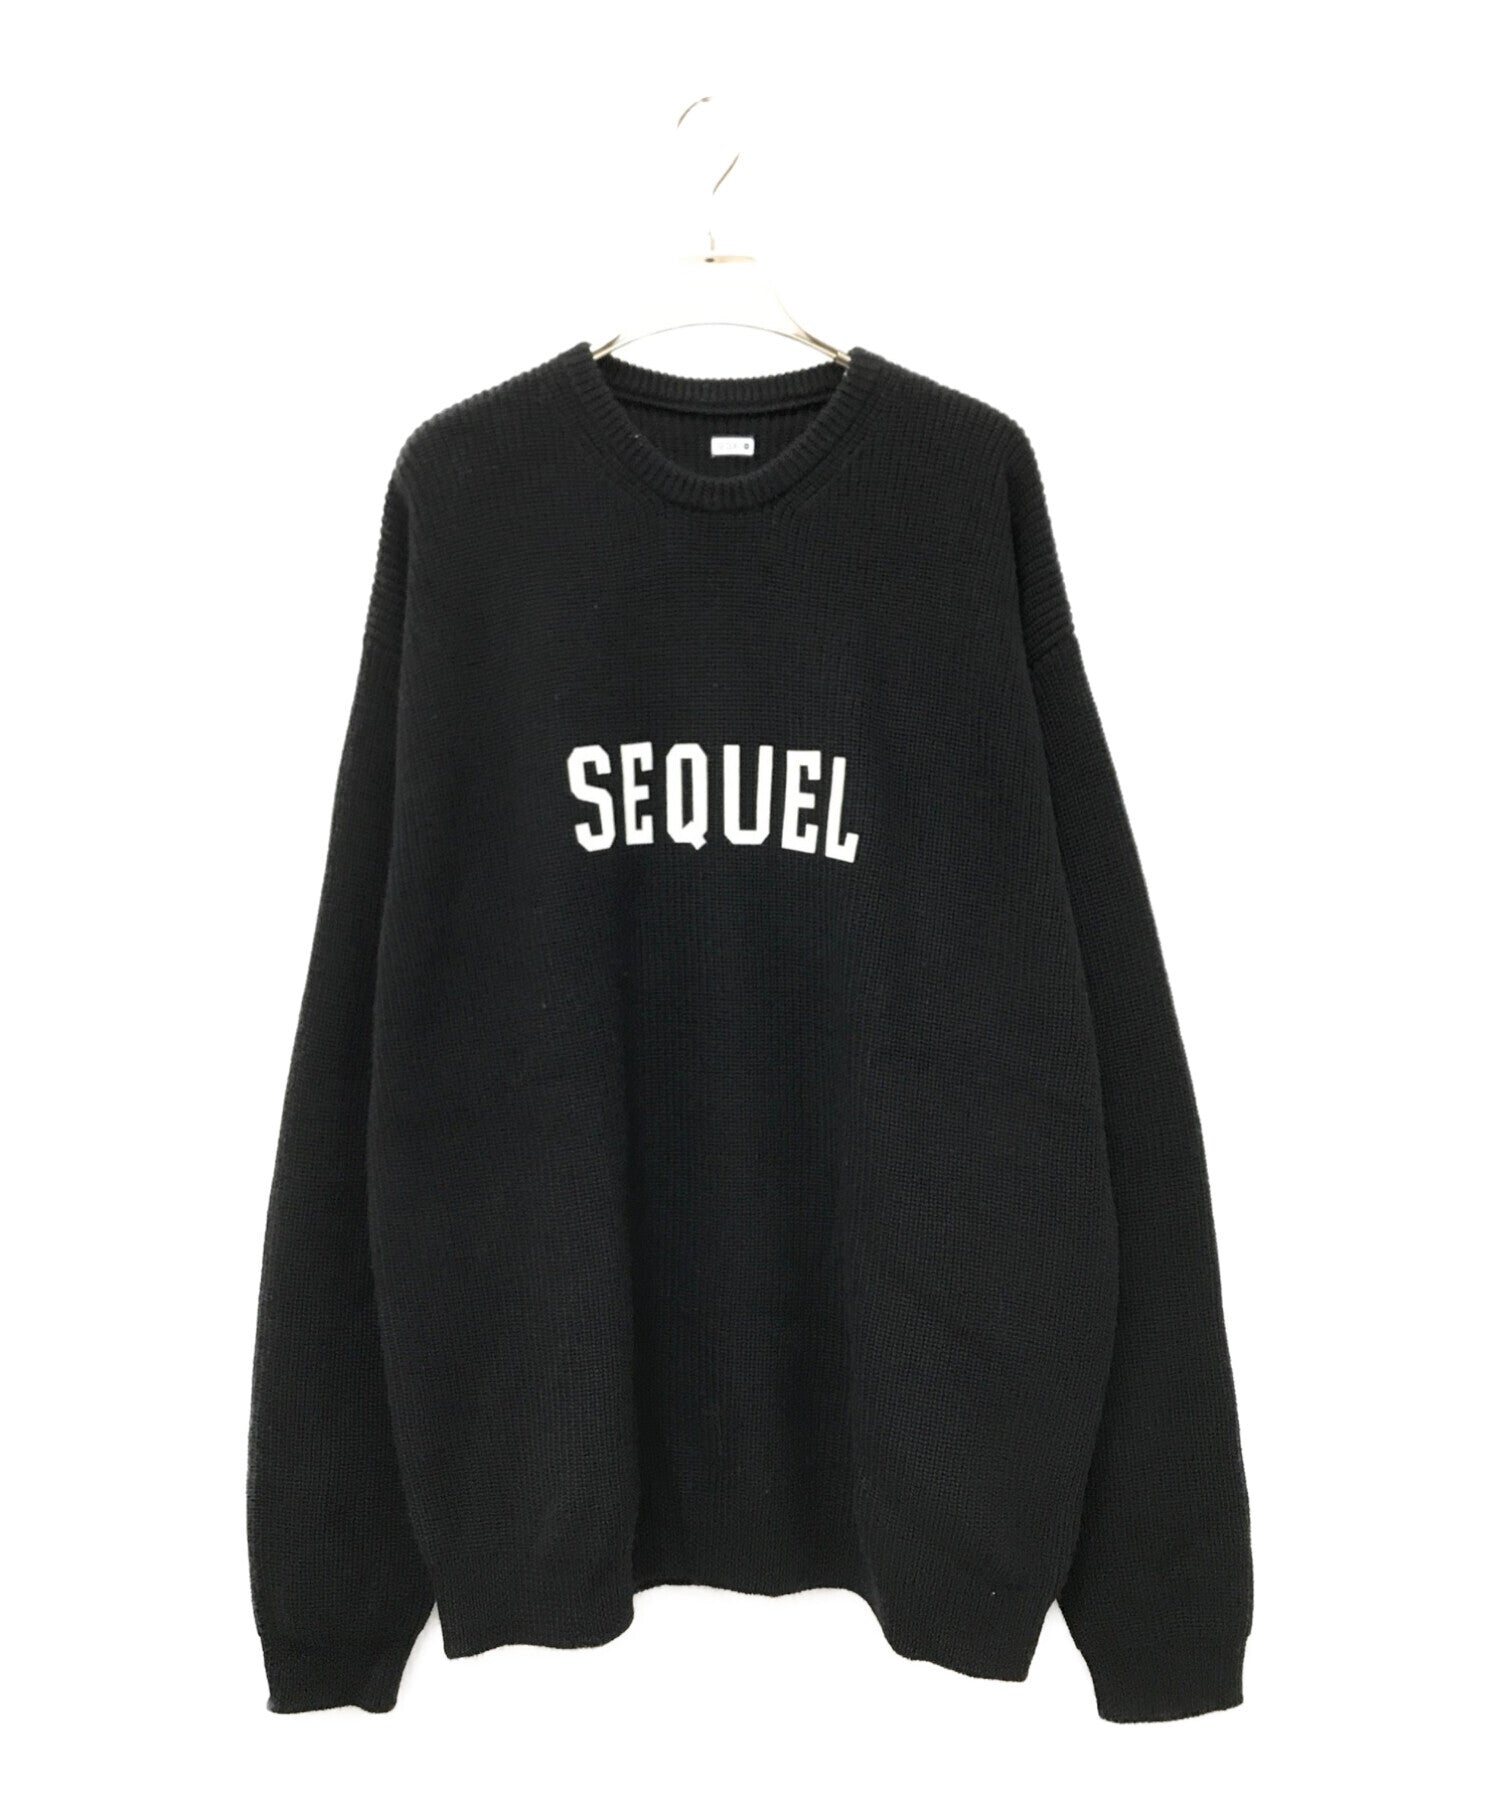 SEQUEL Crew neck knit, logo, popular, rare, sold out immediately 